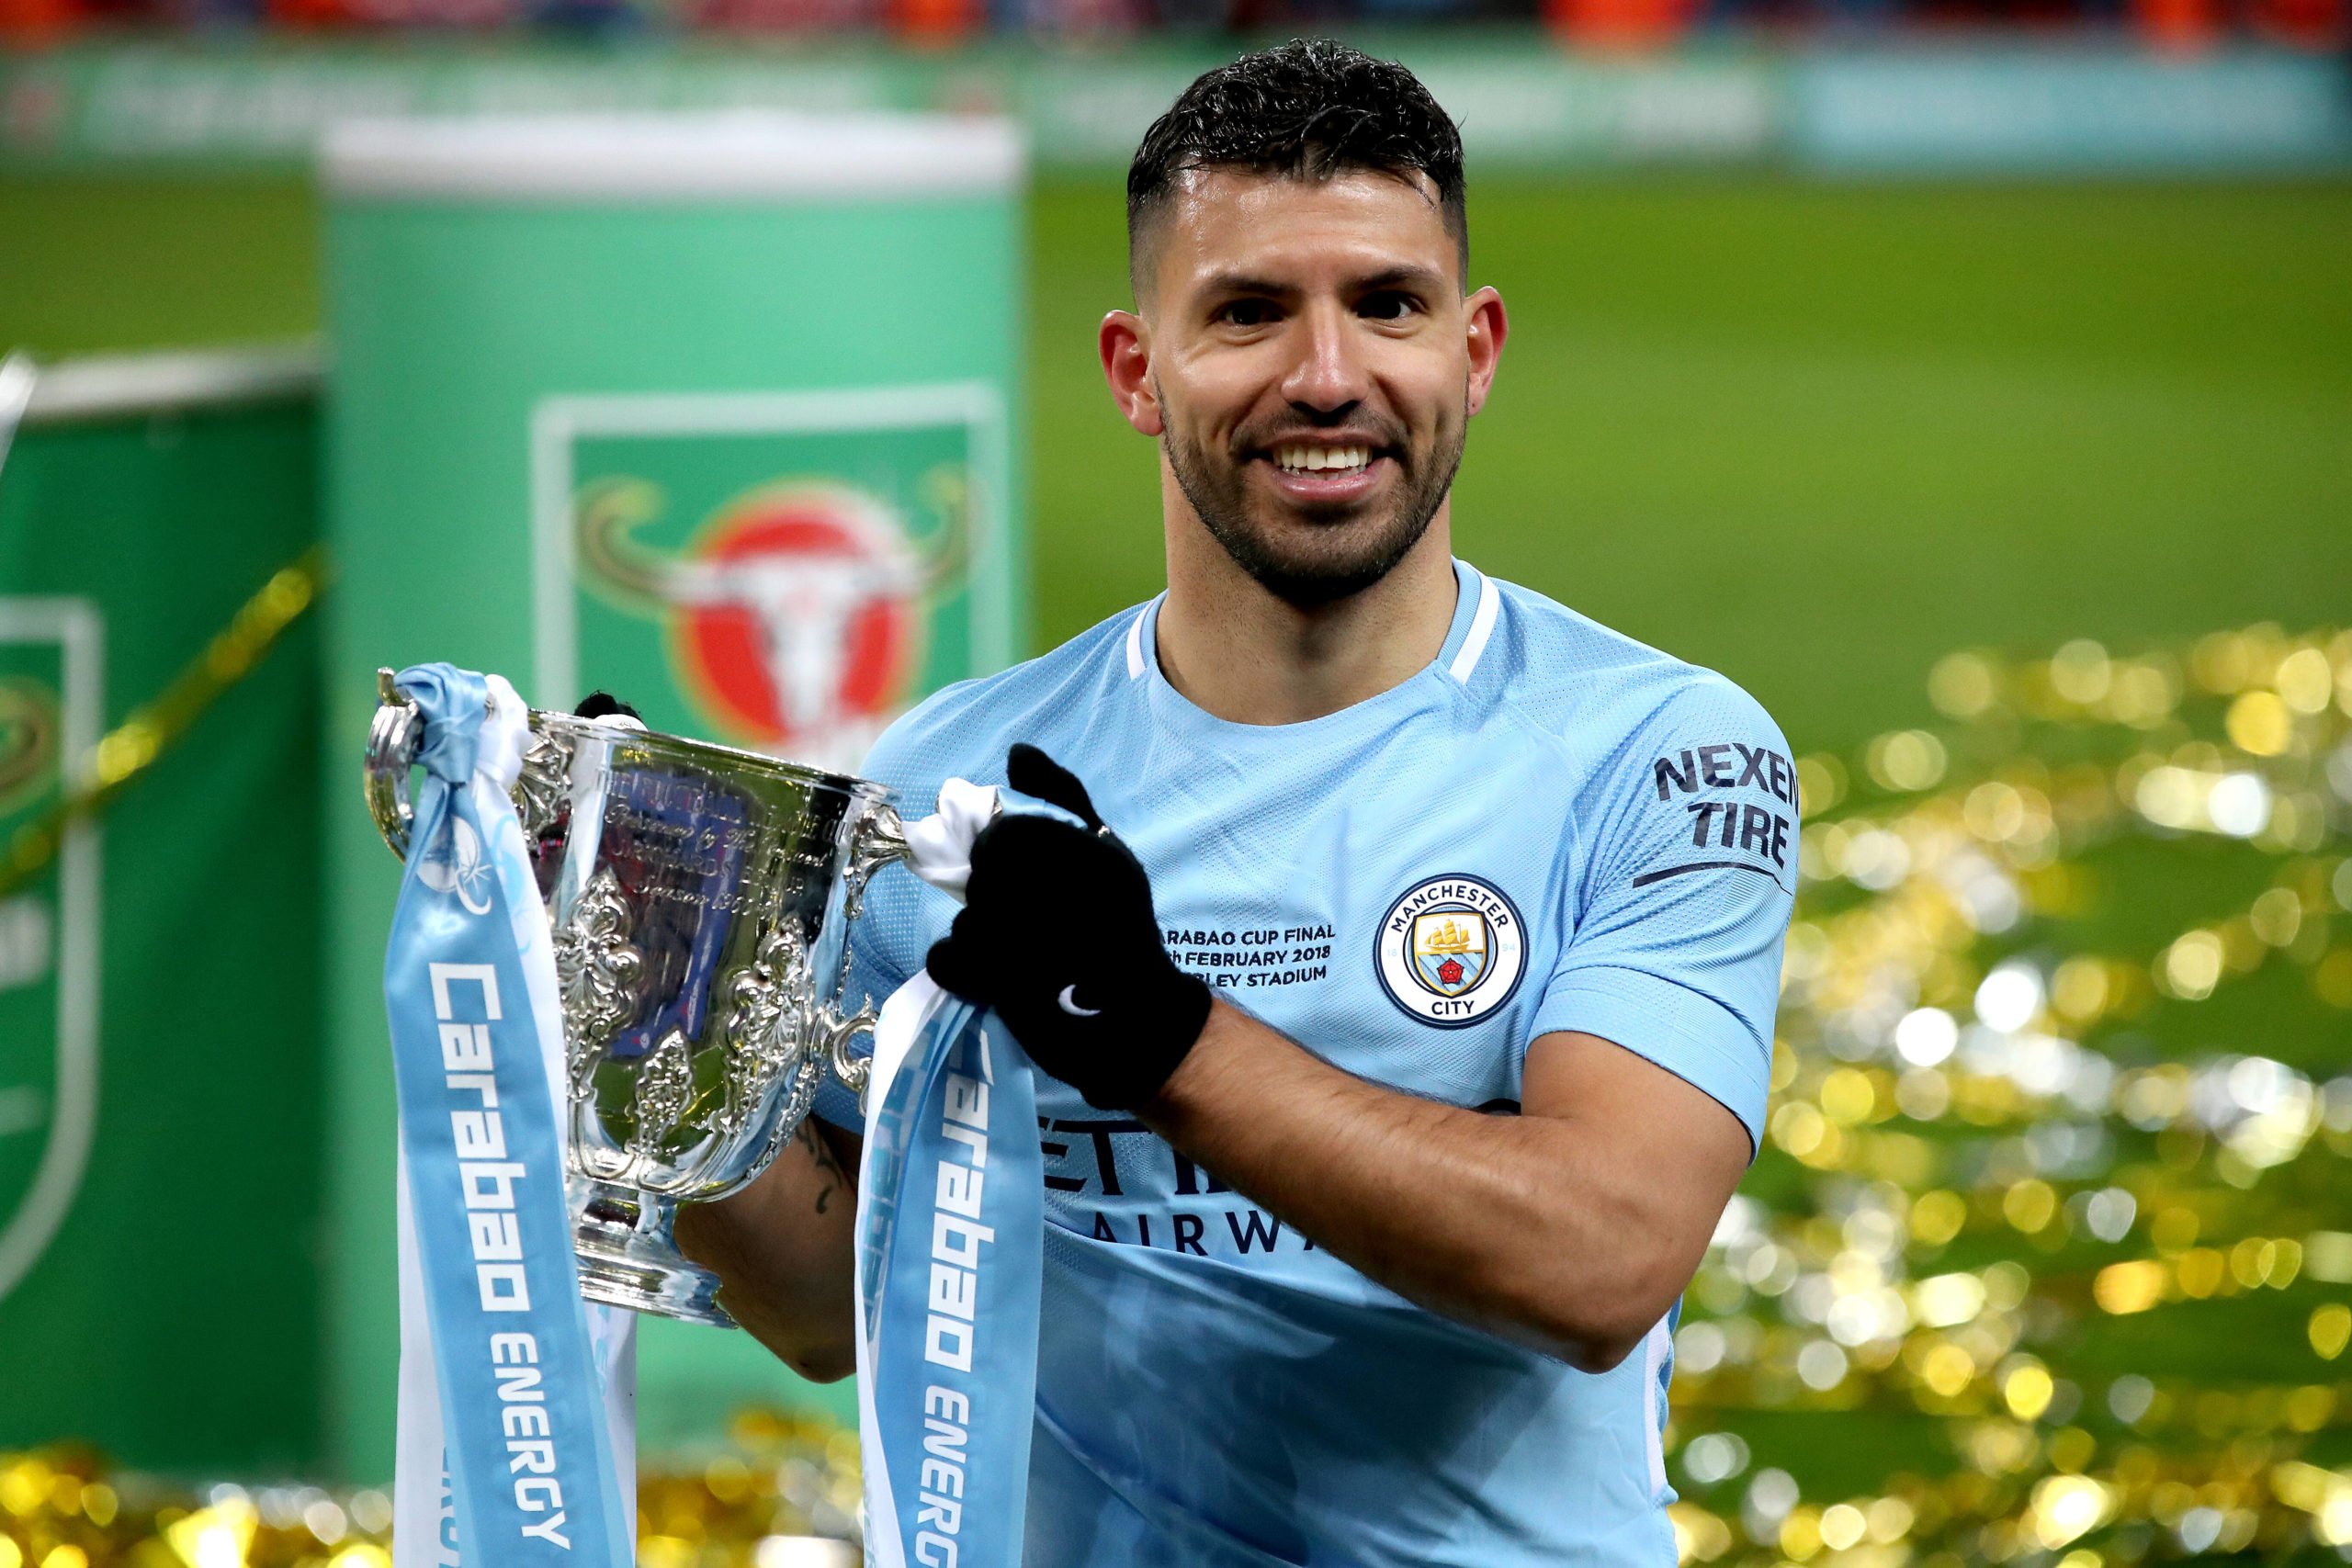 Barcelona's Aguero wants to cancel his contract (Aguero is seen in the picture)